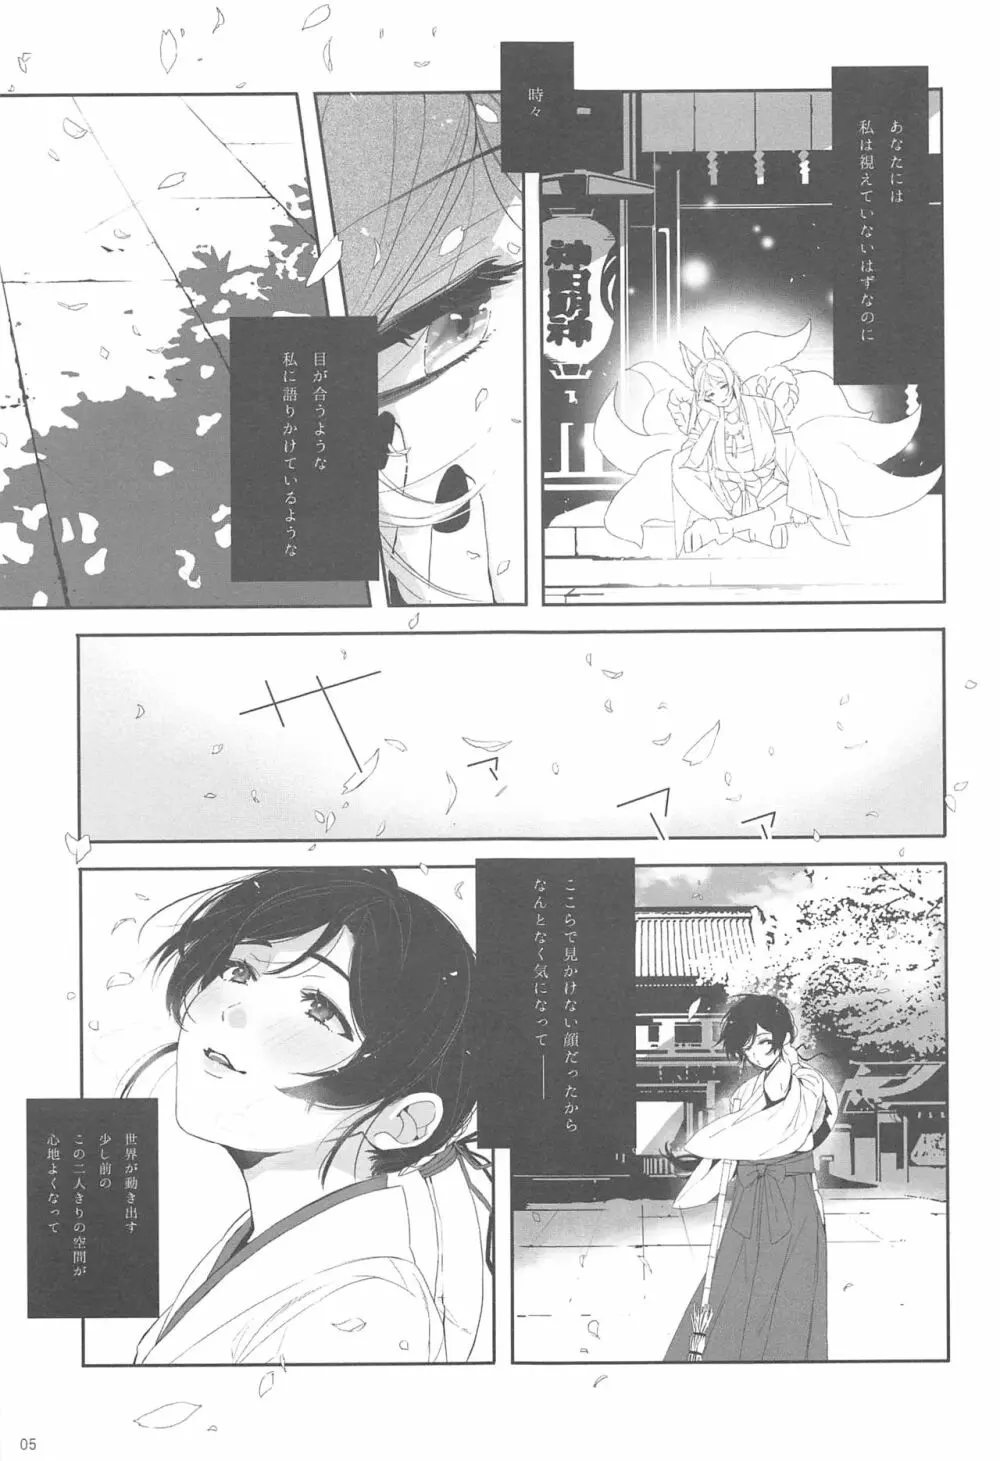 Re:デーデッデー!!!!!!!! - page6